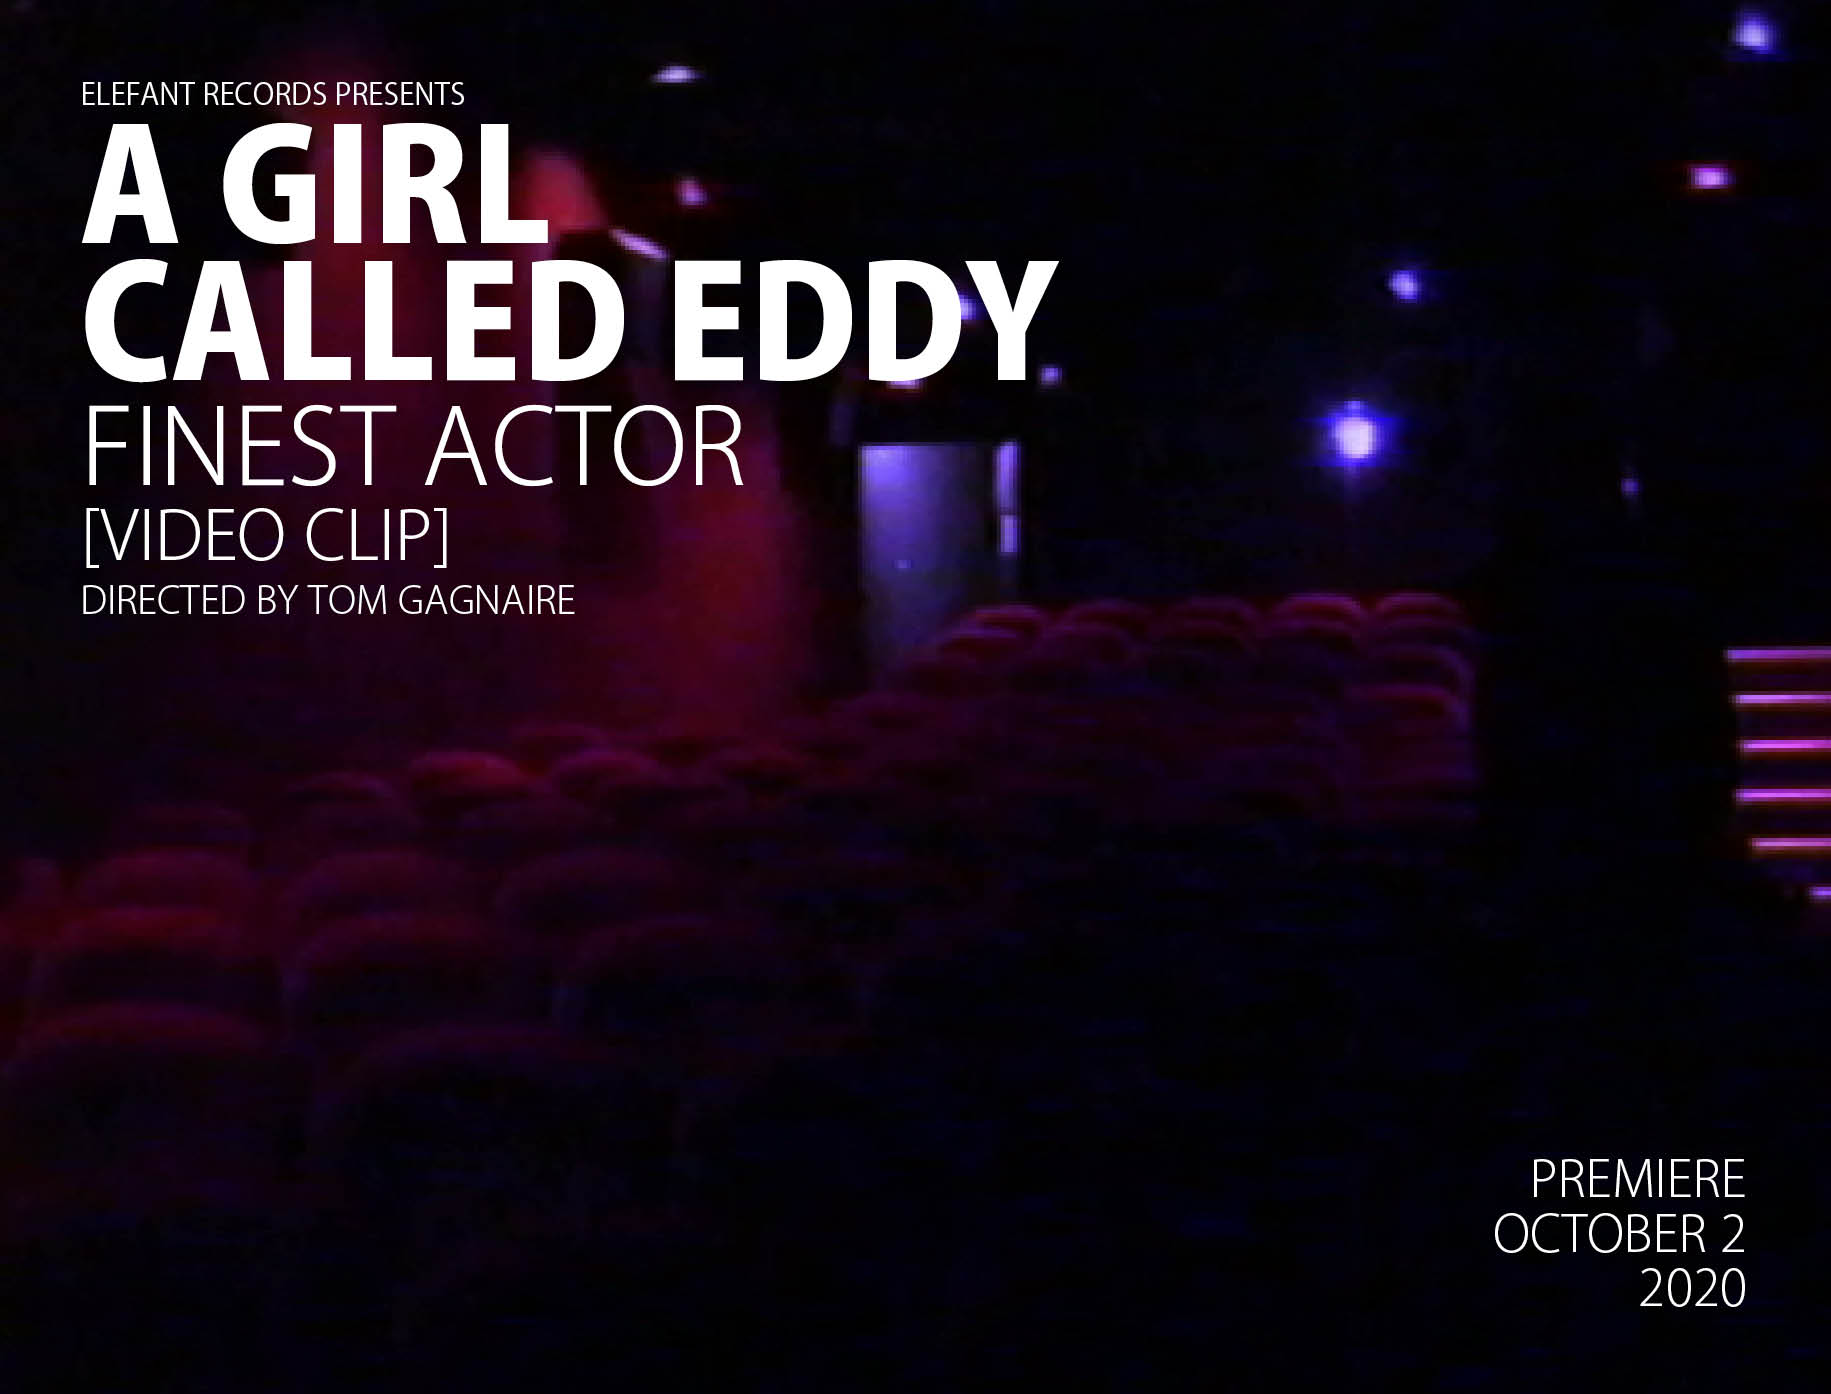  A Girl Called Eddy "Finest Actor" 